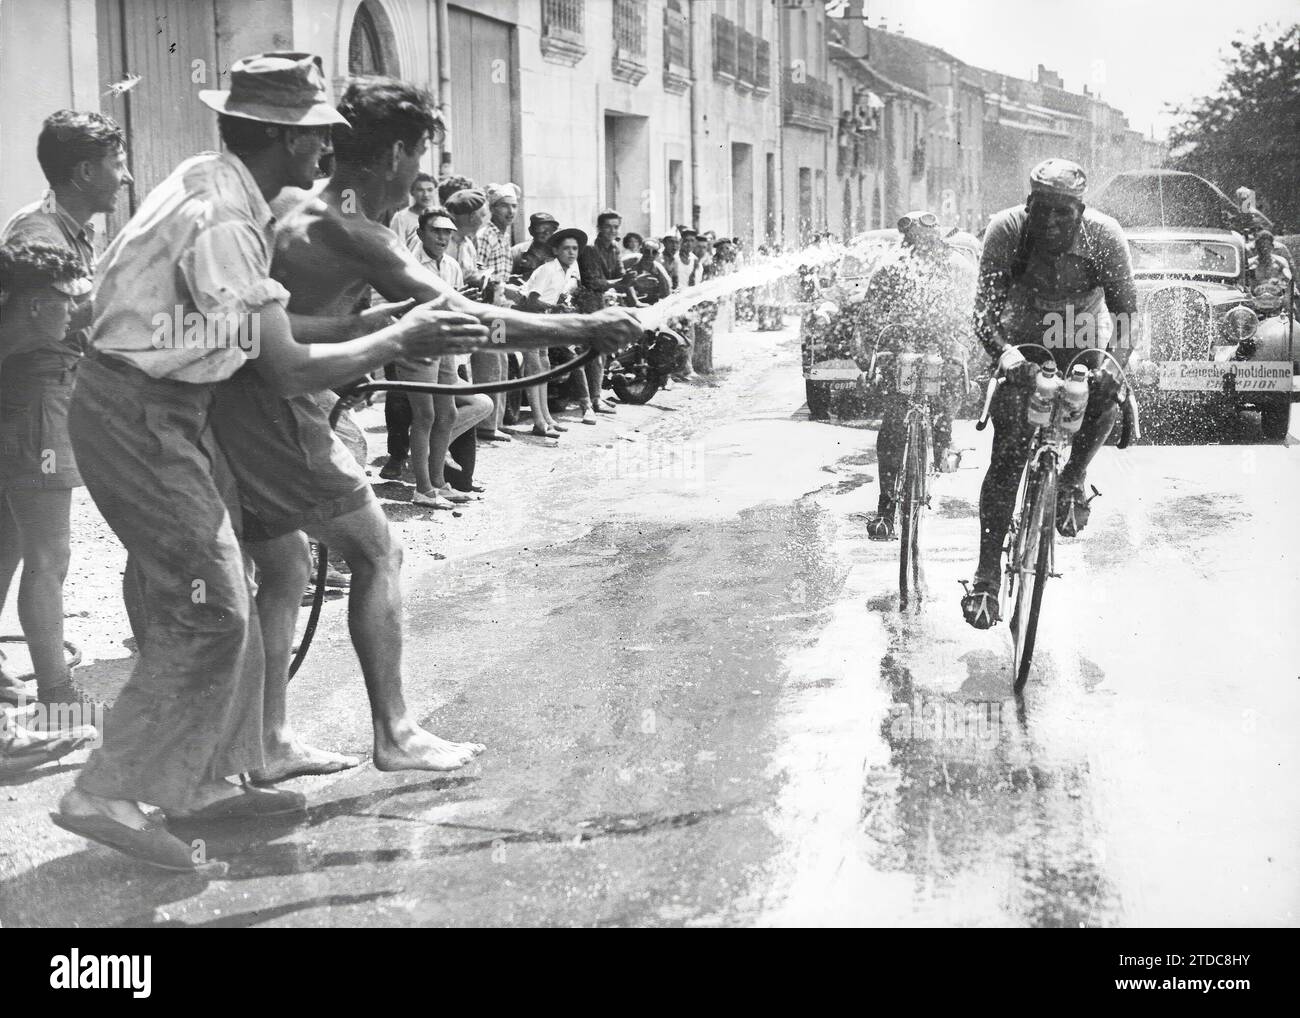 France, July 1950. Tour de France. The stage between Perpignan and Nimes was run in the middle of tremendous heat. In the image, several spectators refresh Zaaf and Molines. Credit: Album / Archivo ABC Stock Photo